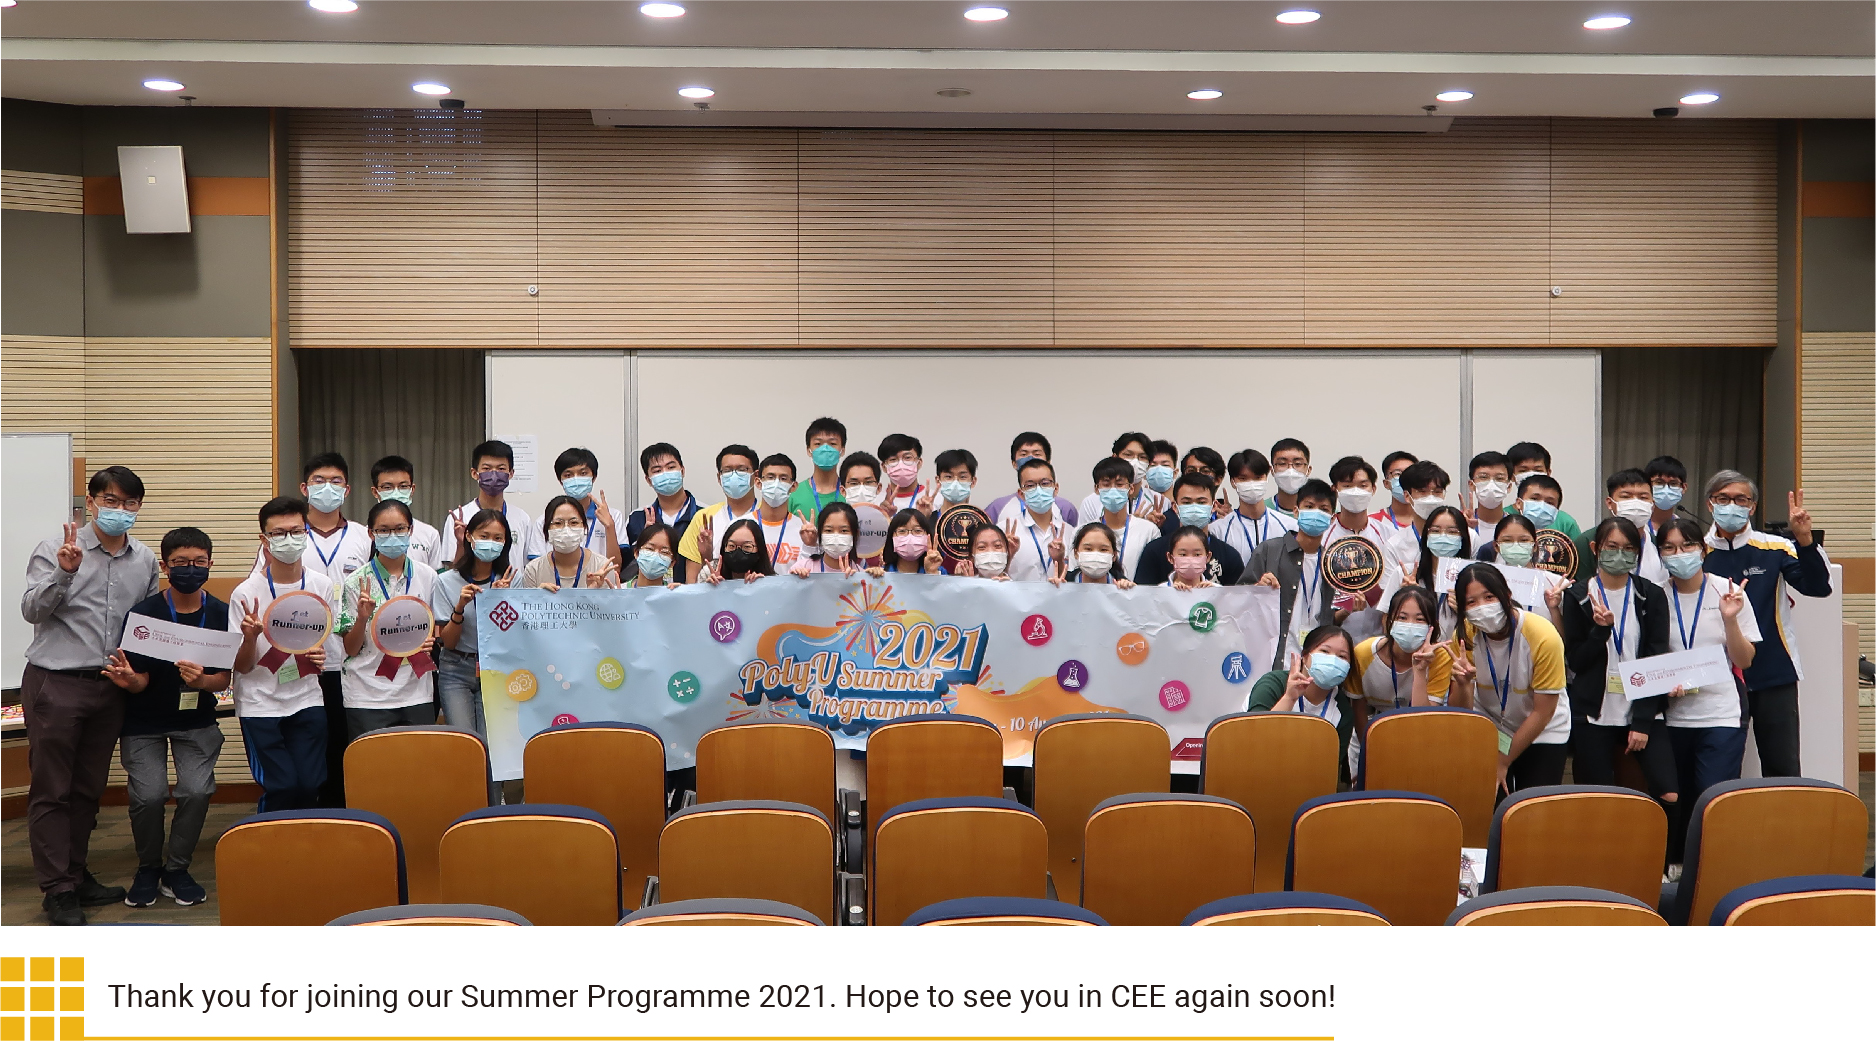 Thank you for joining our Summer Programme 2021. Hope to see you in CEE again soon!